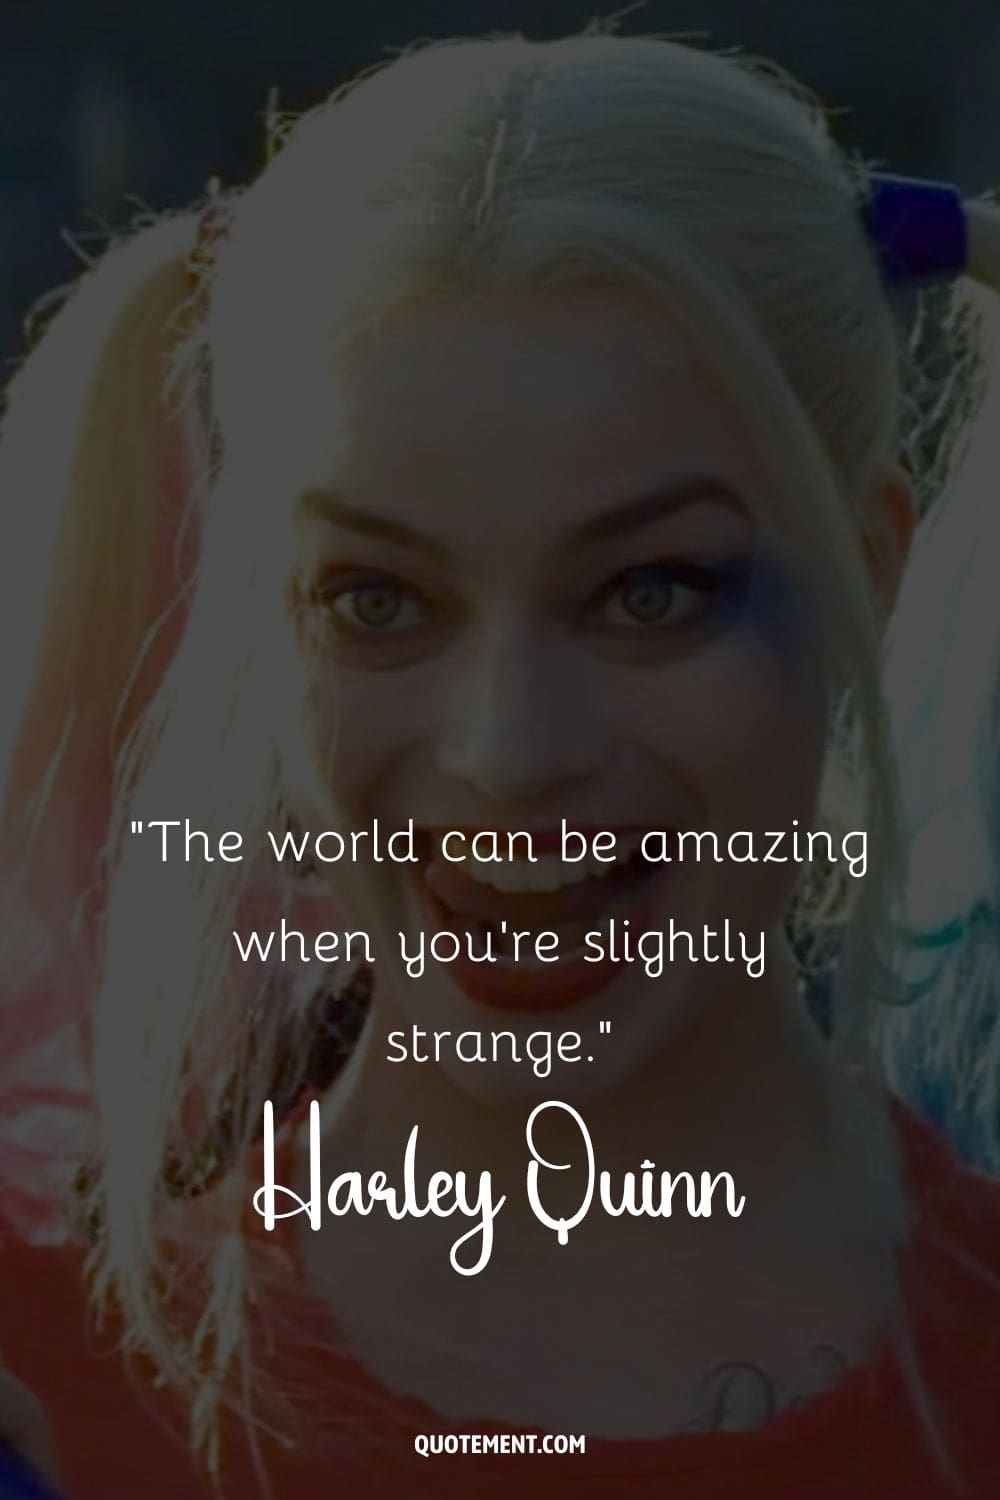 Harley Quinn's unique charm captures everyone's attention.